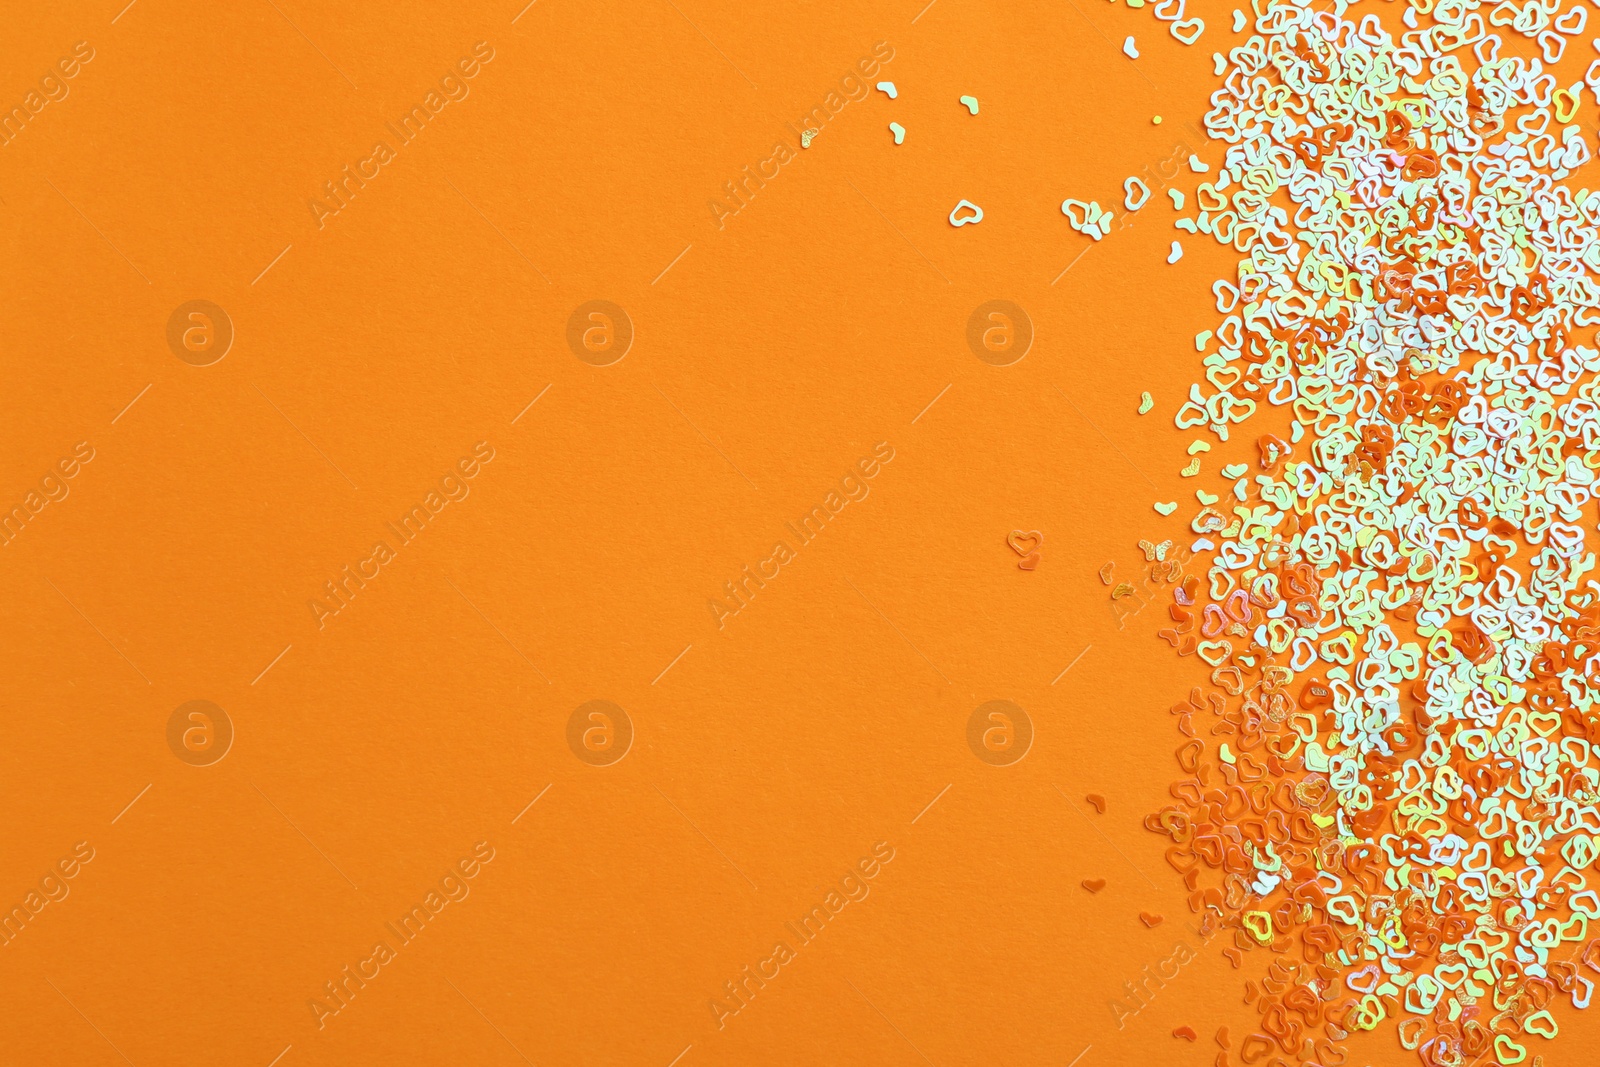 Photo of Shiny bright heart shaped glitter on orange background, top view. Space for text